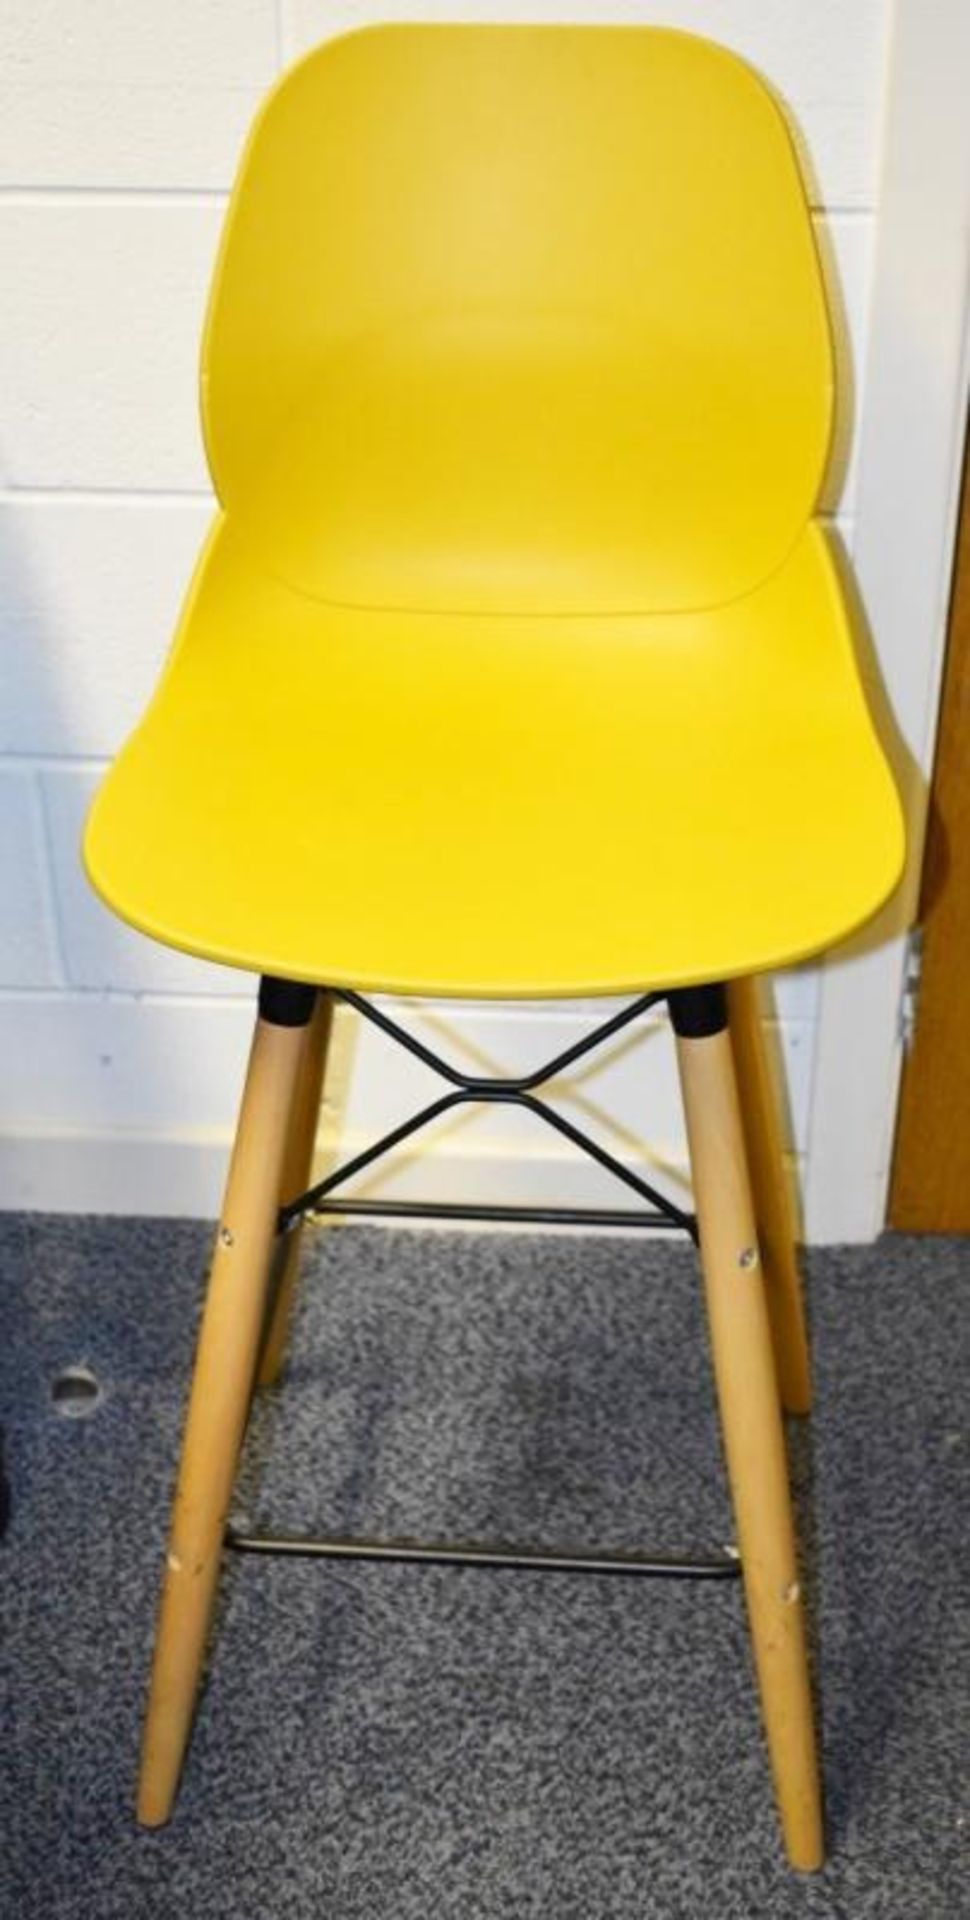 3 x GRESHAM Eames-Style Bar Stools - 3 Colours - Used, Please See Condition Report - CL437 - Locatio - Image 5 of 7